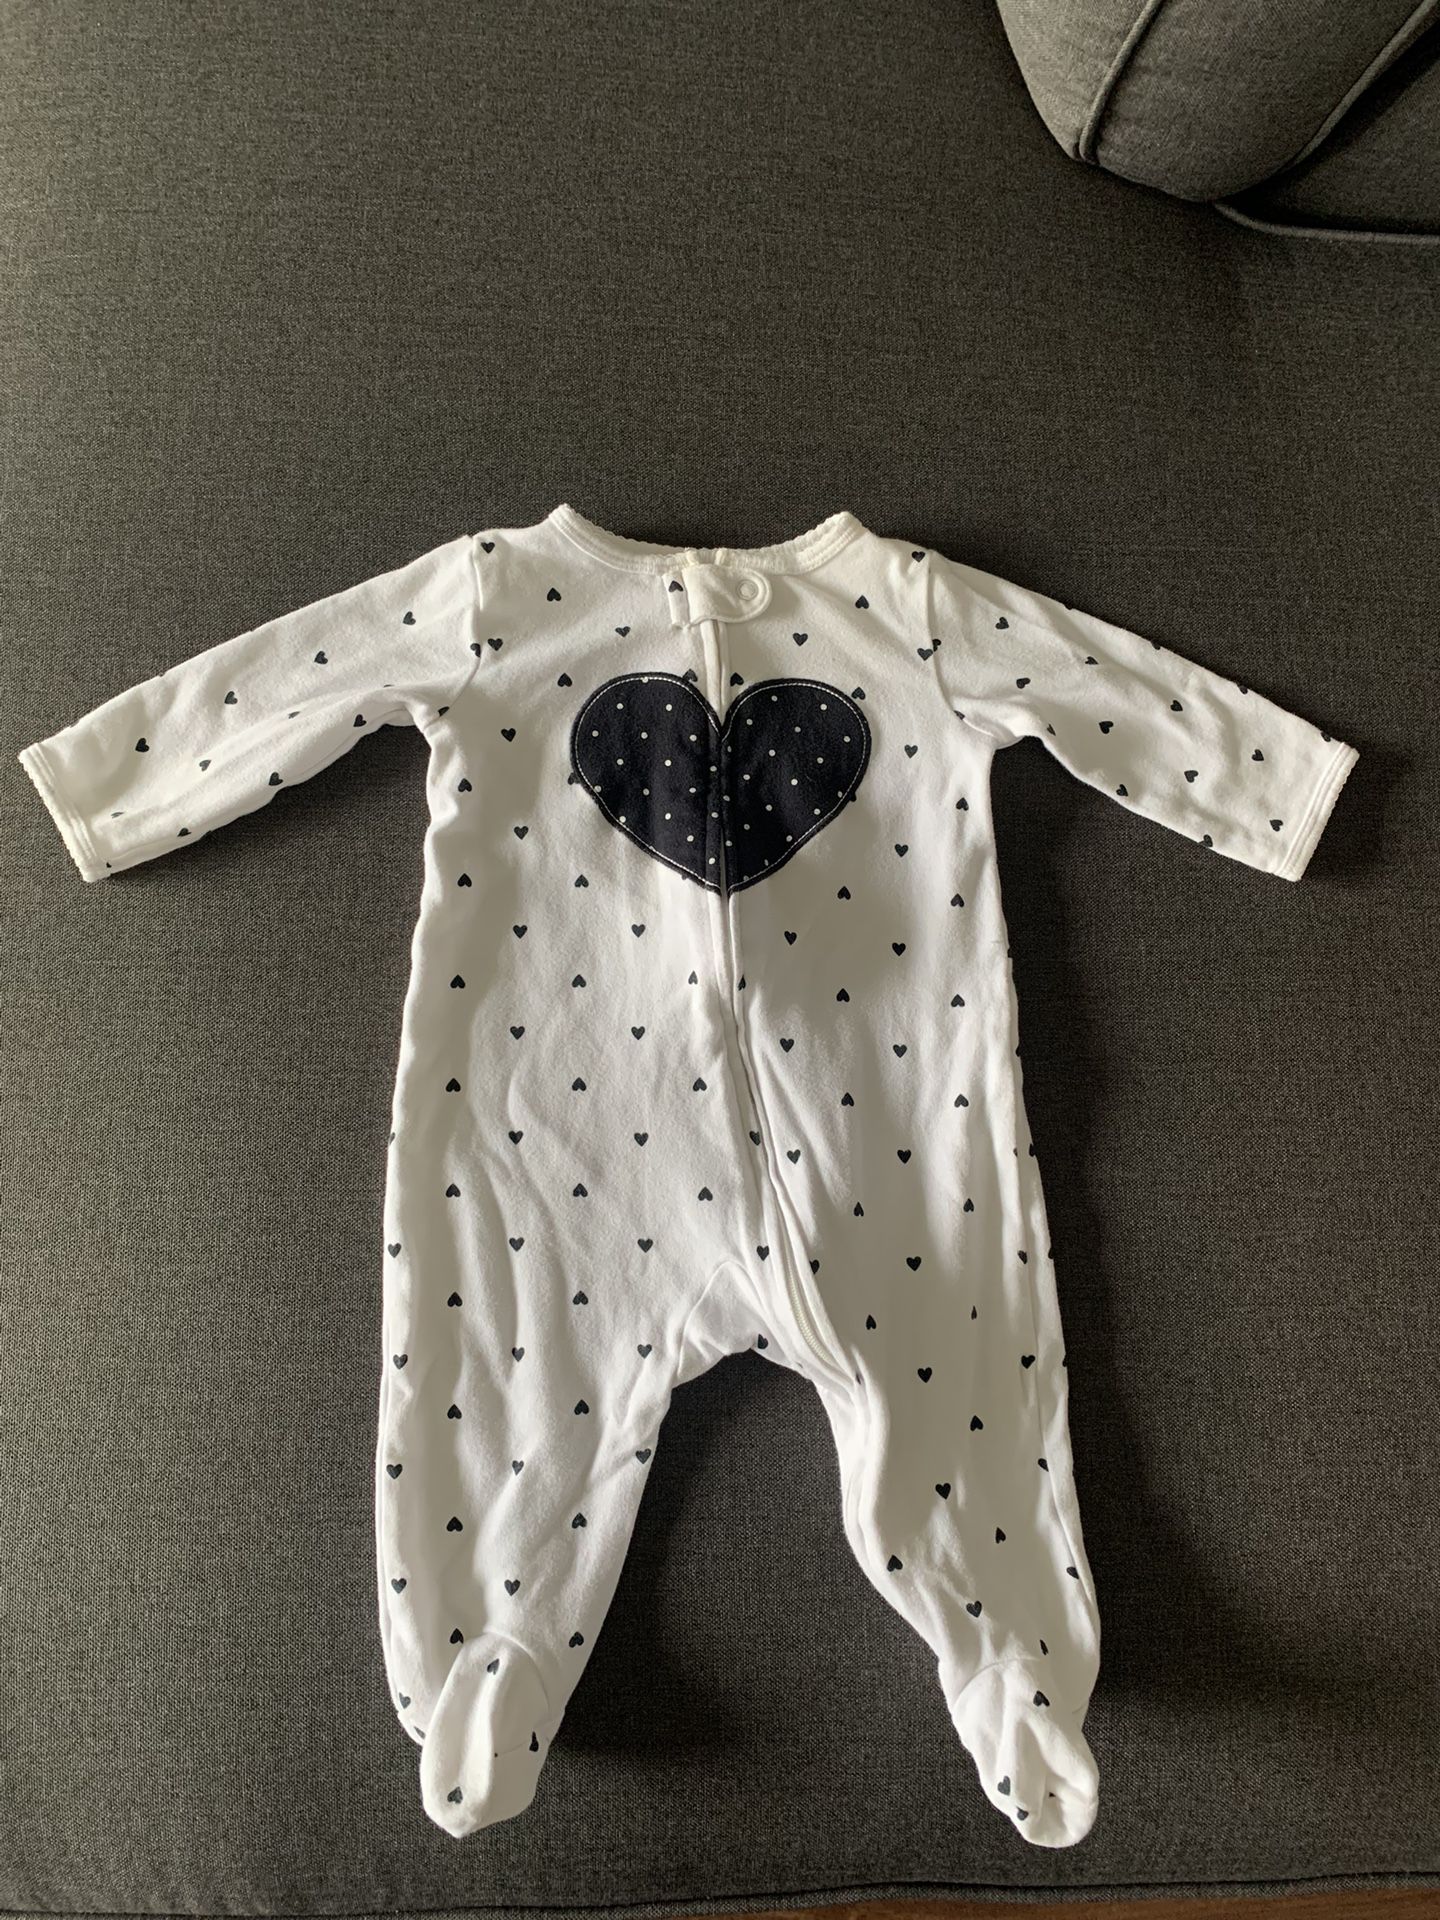 Carter’s Baby Jumpsuit in Blue Hearts and White Polka Dots Design 9 Months Old